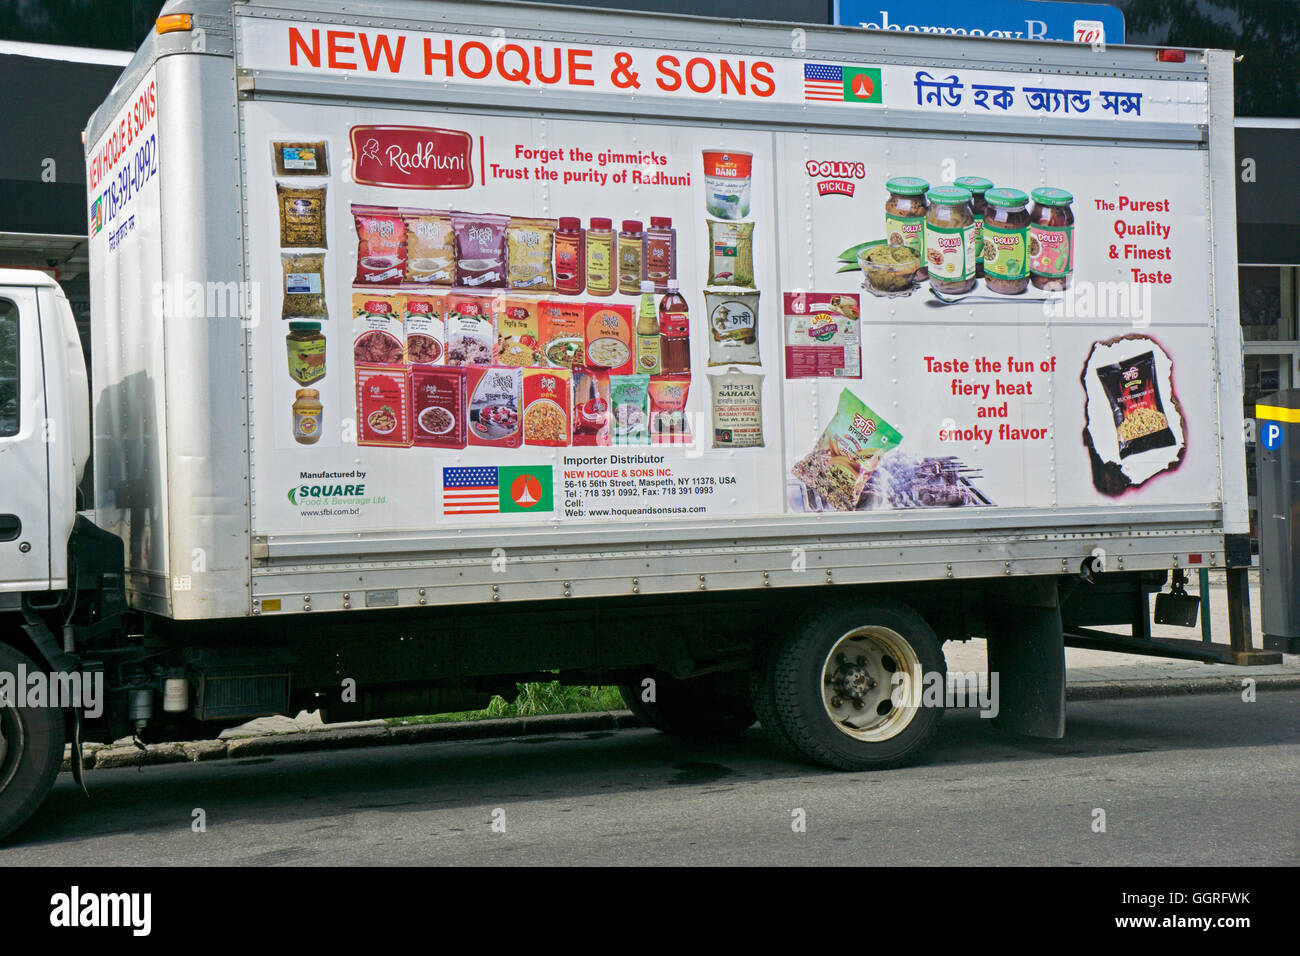 A truck from NEW HOQUE & SONS an importer and distributor of Bangadeshi foods from Bangladesh, India & Pakistan. In Queens, NY Stock Photo